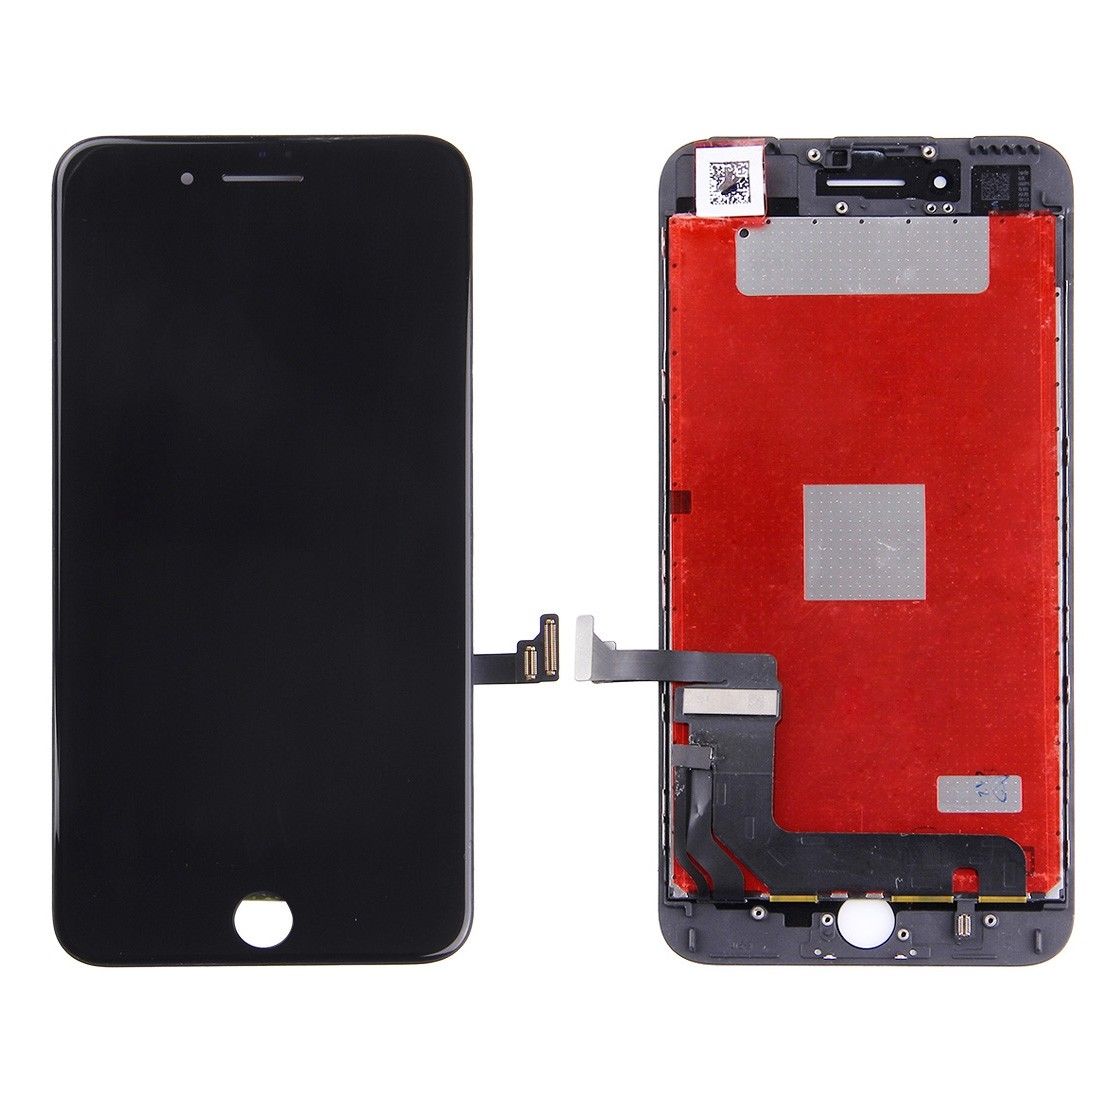 Apple iPhone 7 Replacement LCD Touch Screen Assembly - Black for [product_price] - First Help Tech